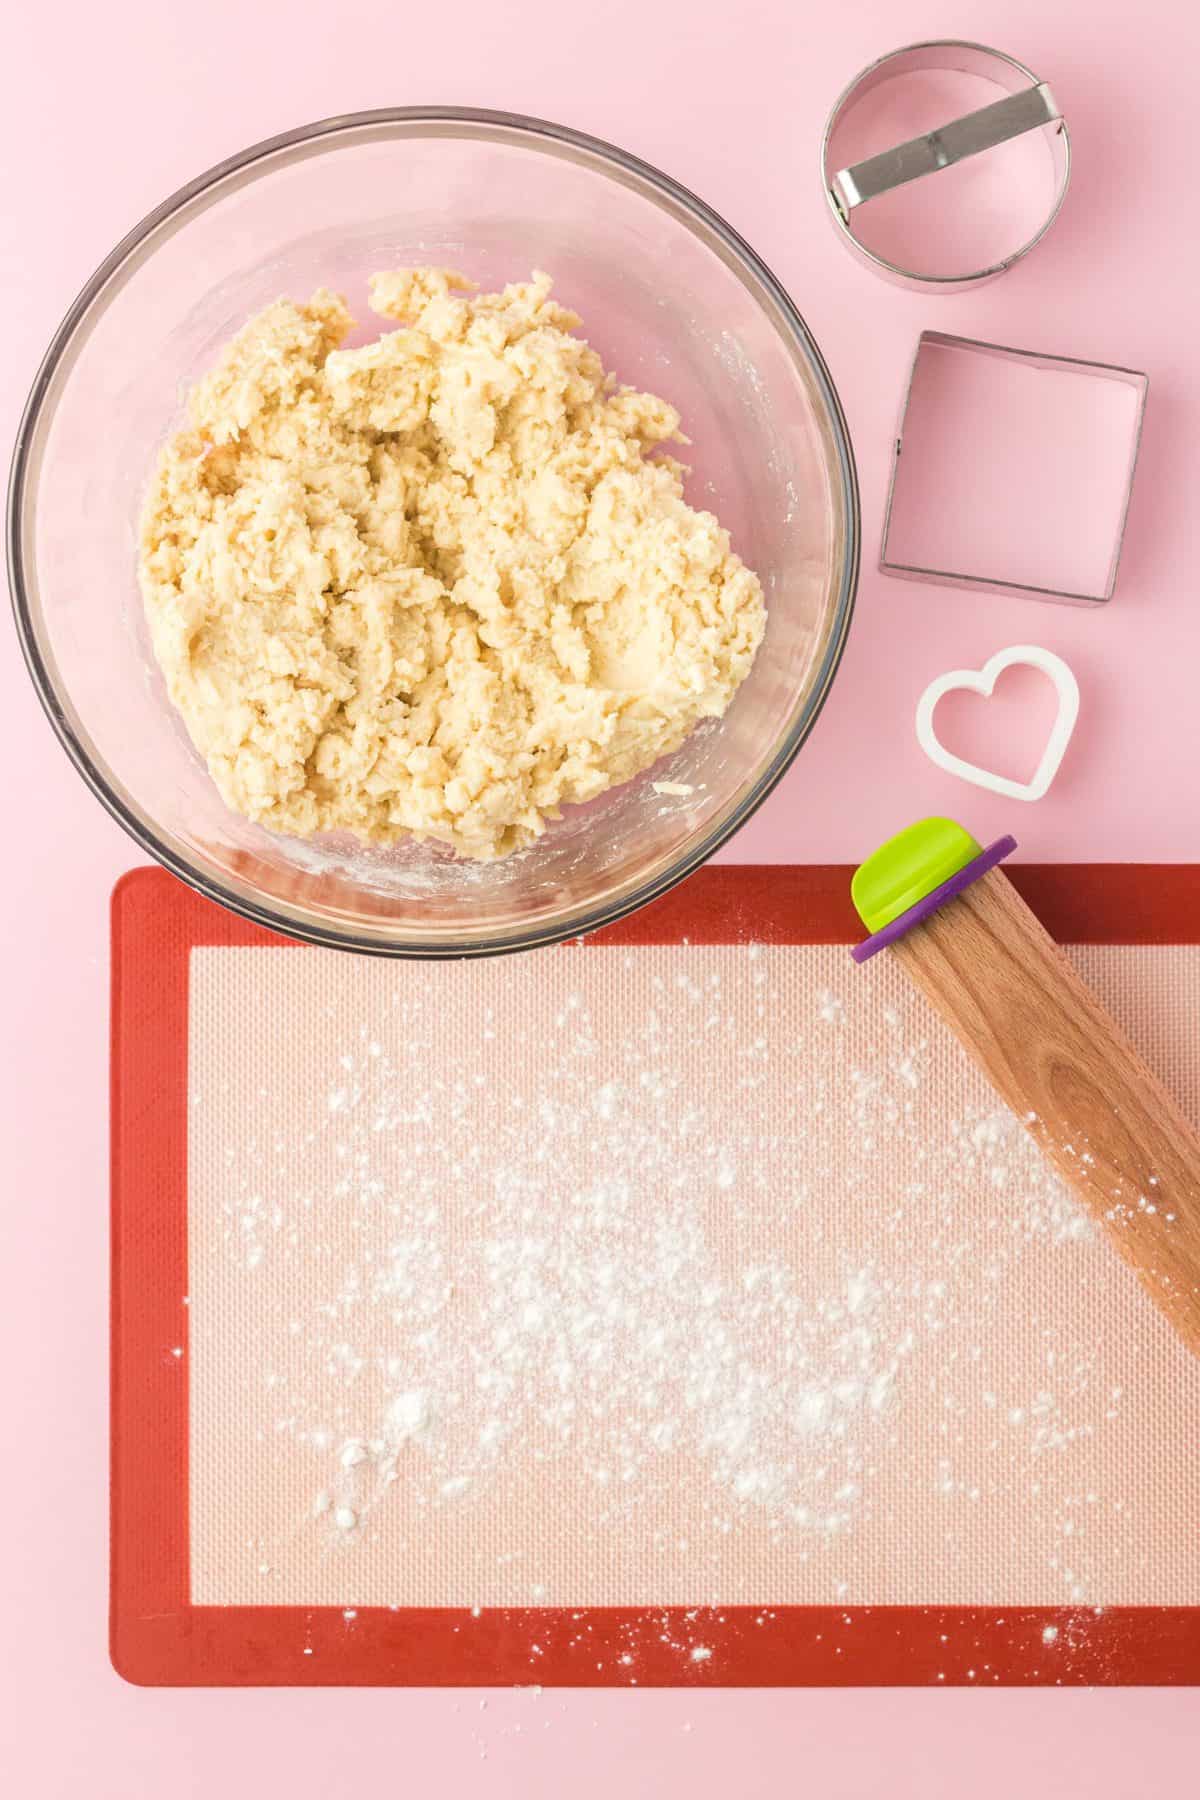 sprinkling flour on surface to roll out sugar cookie dough